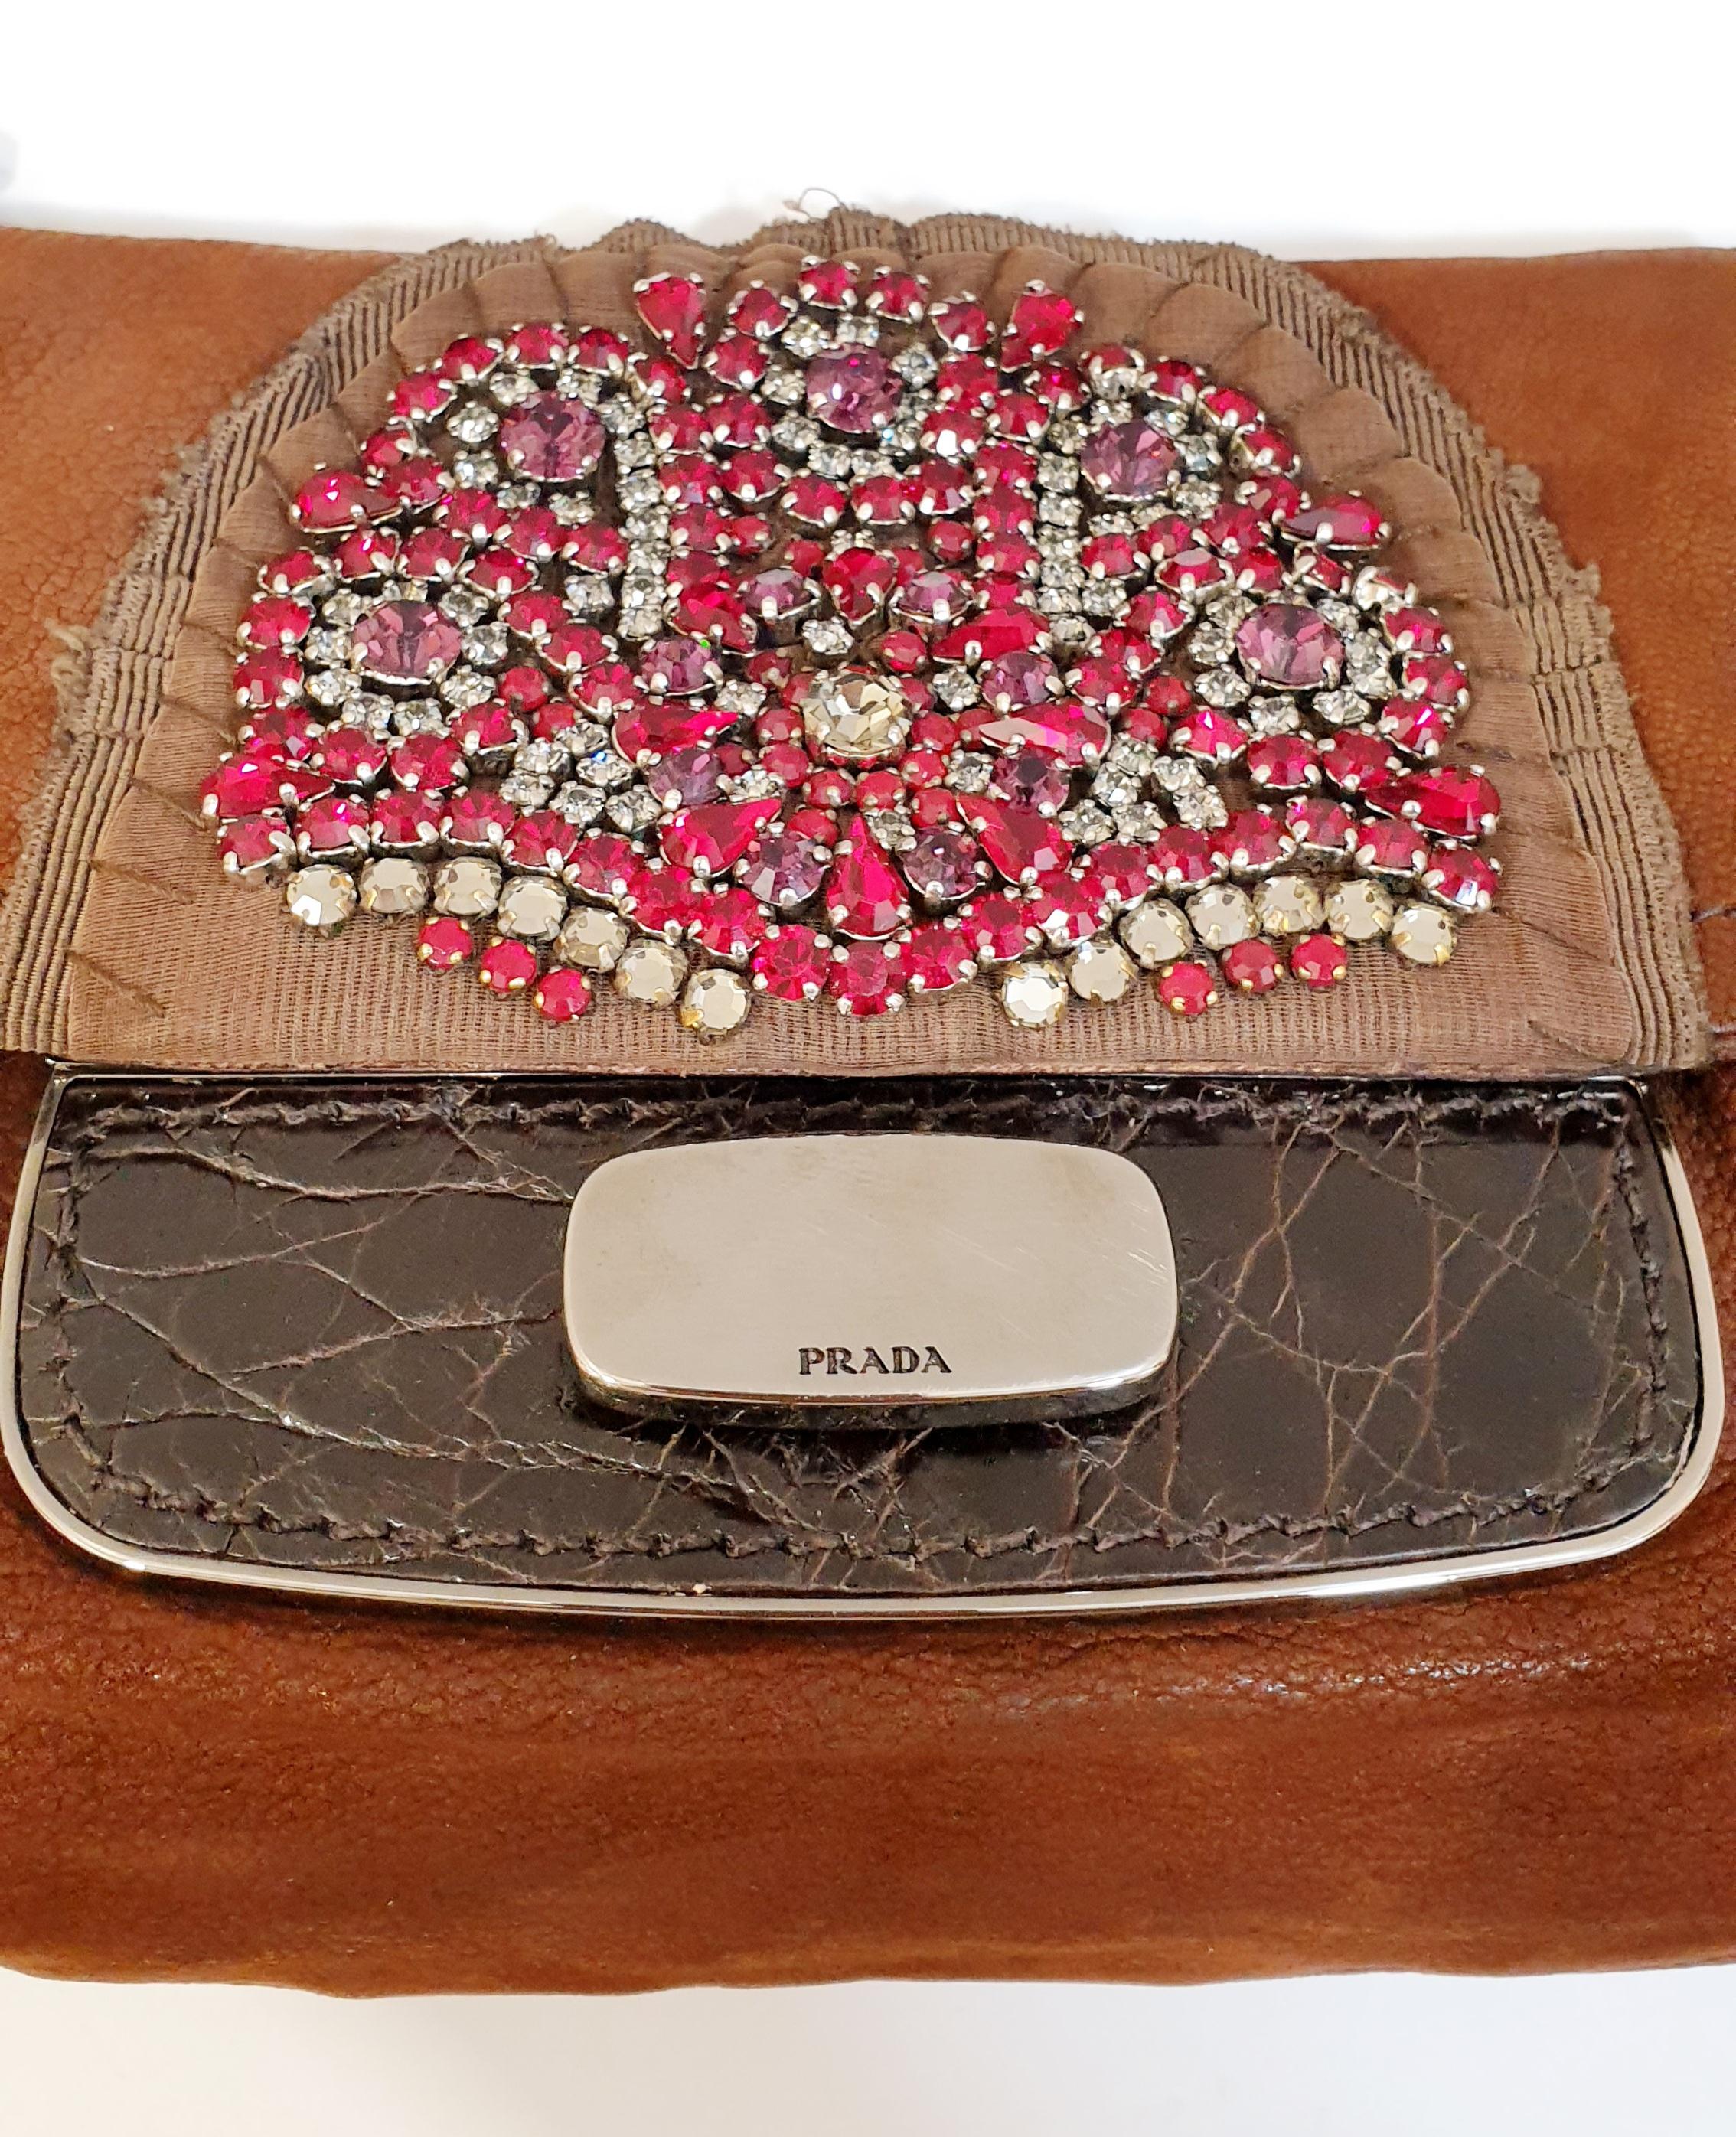 VIintage Prada Clutch in Carved Leather Suede and Swaroski crystals  For Sale 1